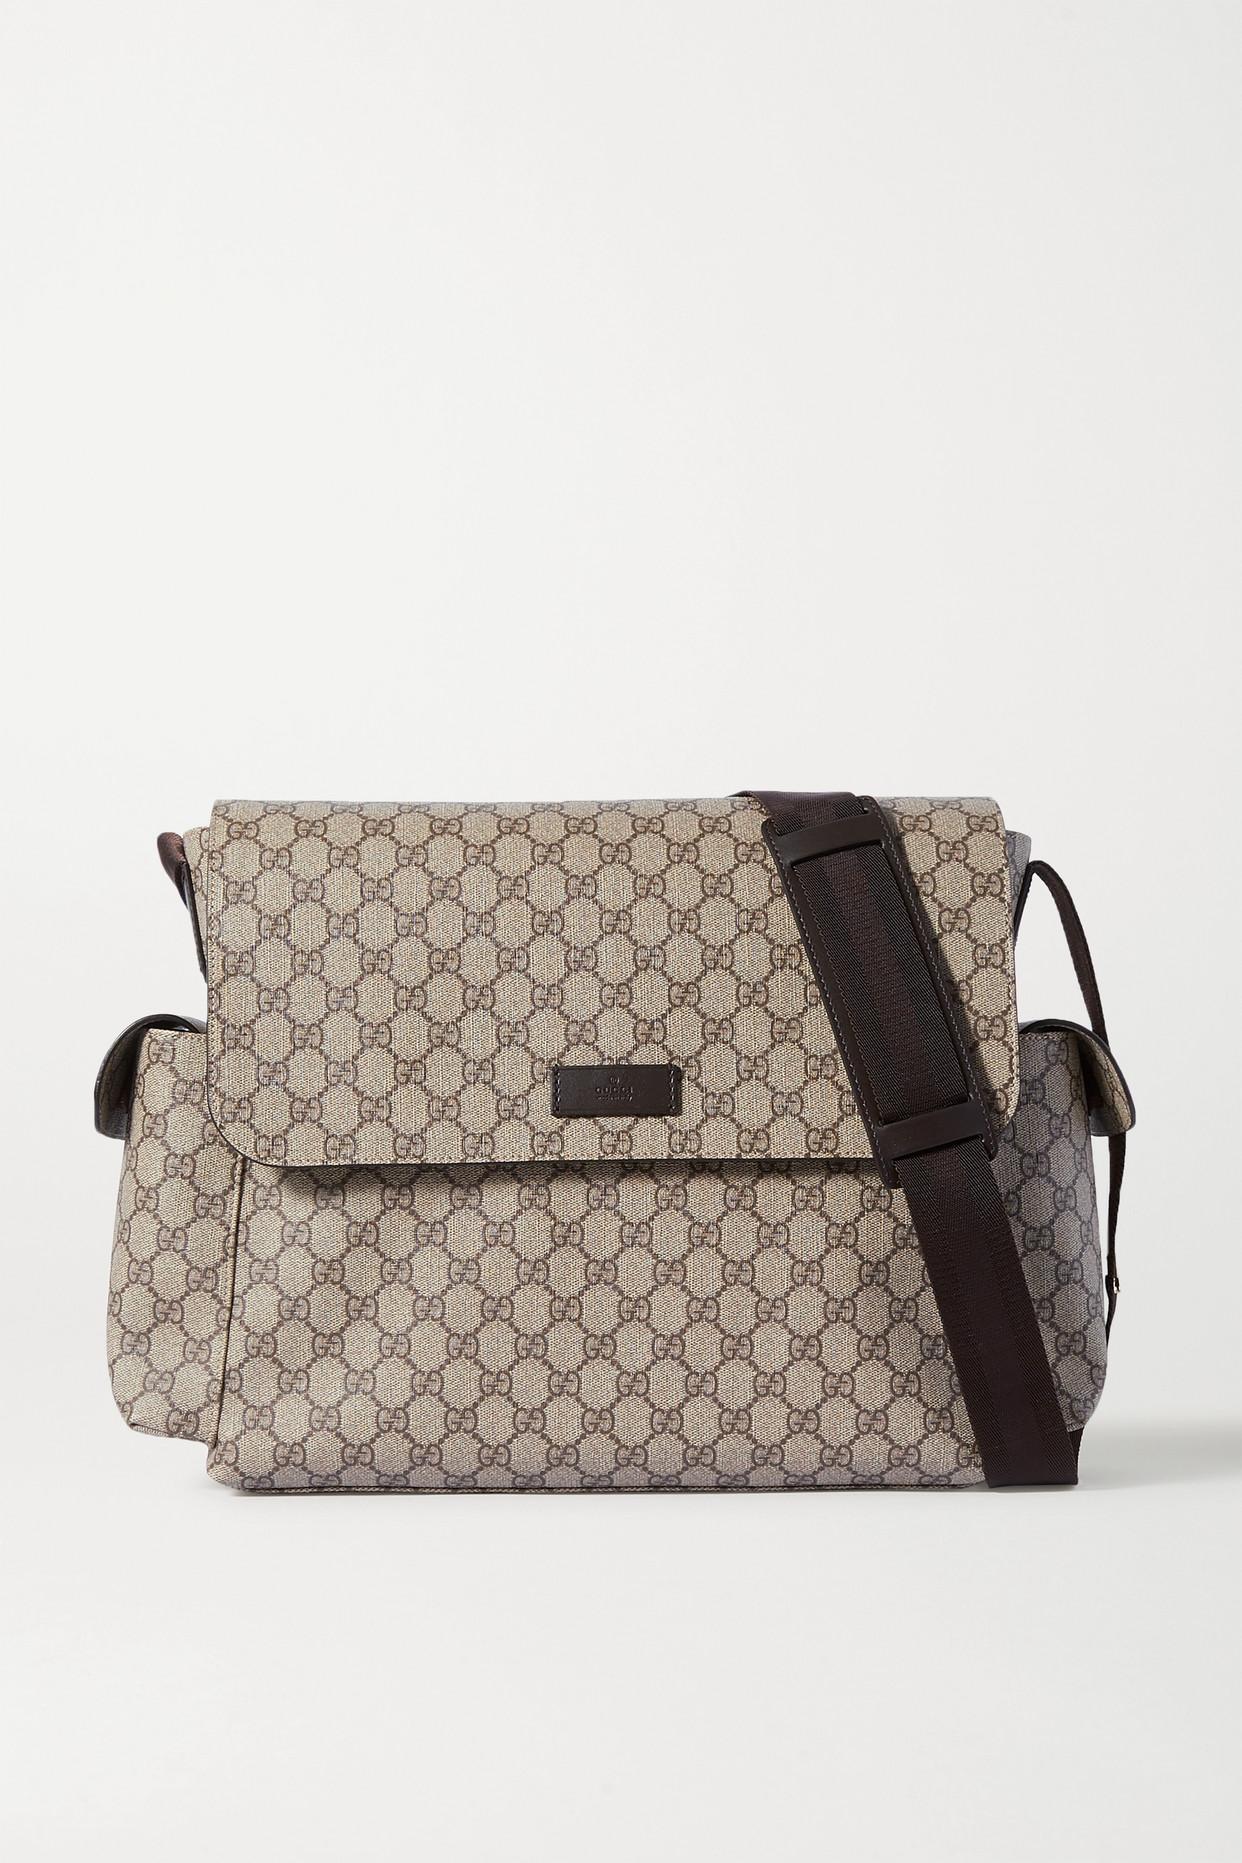 Verkeersopstopping cursief achterzijde Gucci Ophidia Printed Coated-canvas Diaper Bag | Lyst